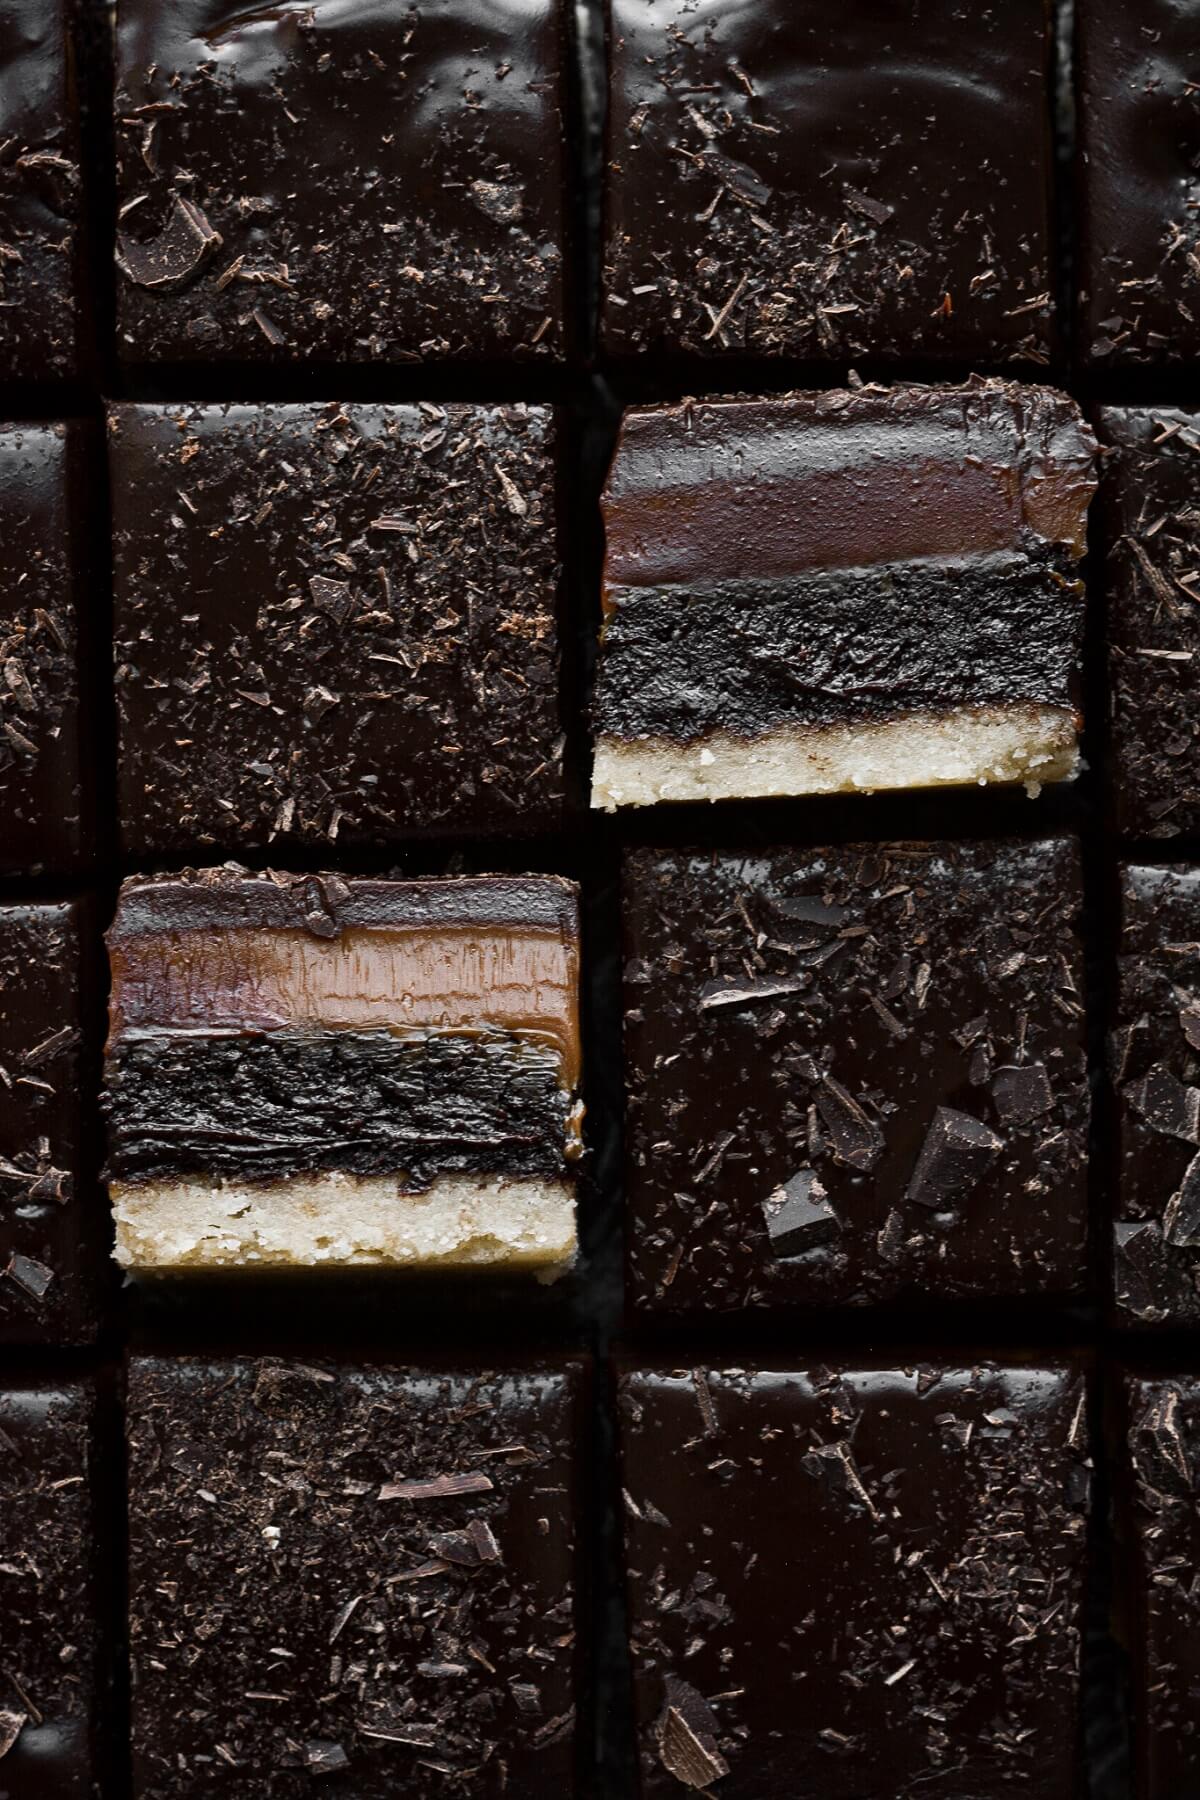 Millionaire shortbread brownie bars with layers of shortbread, brownies, dulce de leche and ganache.